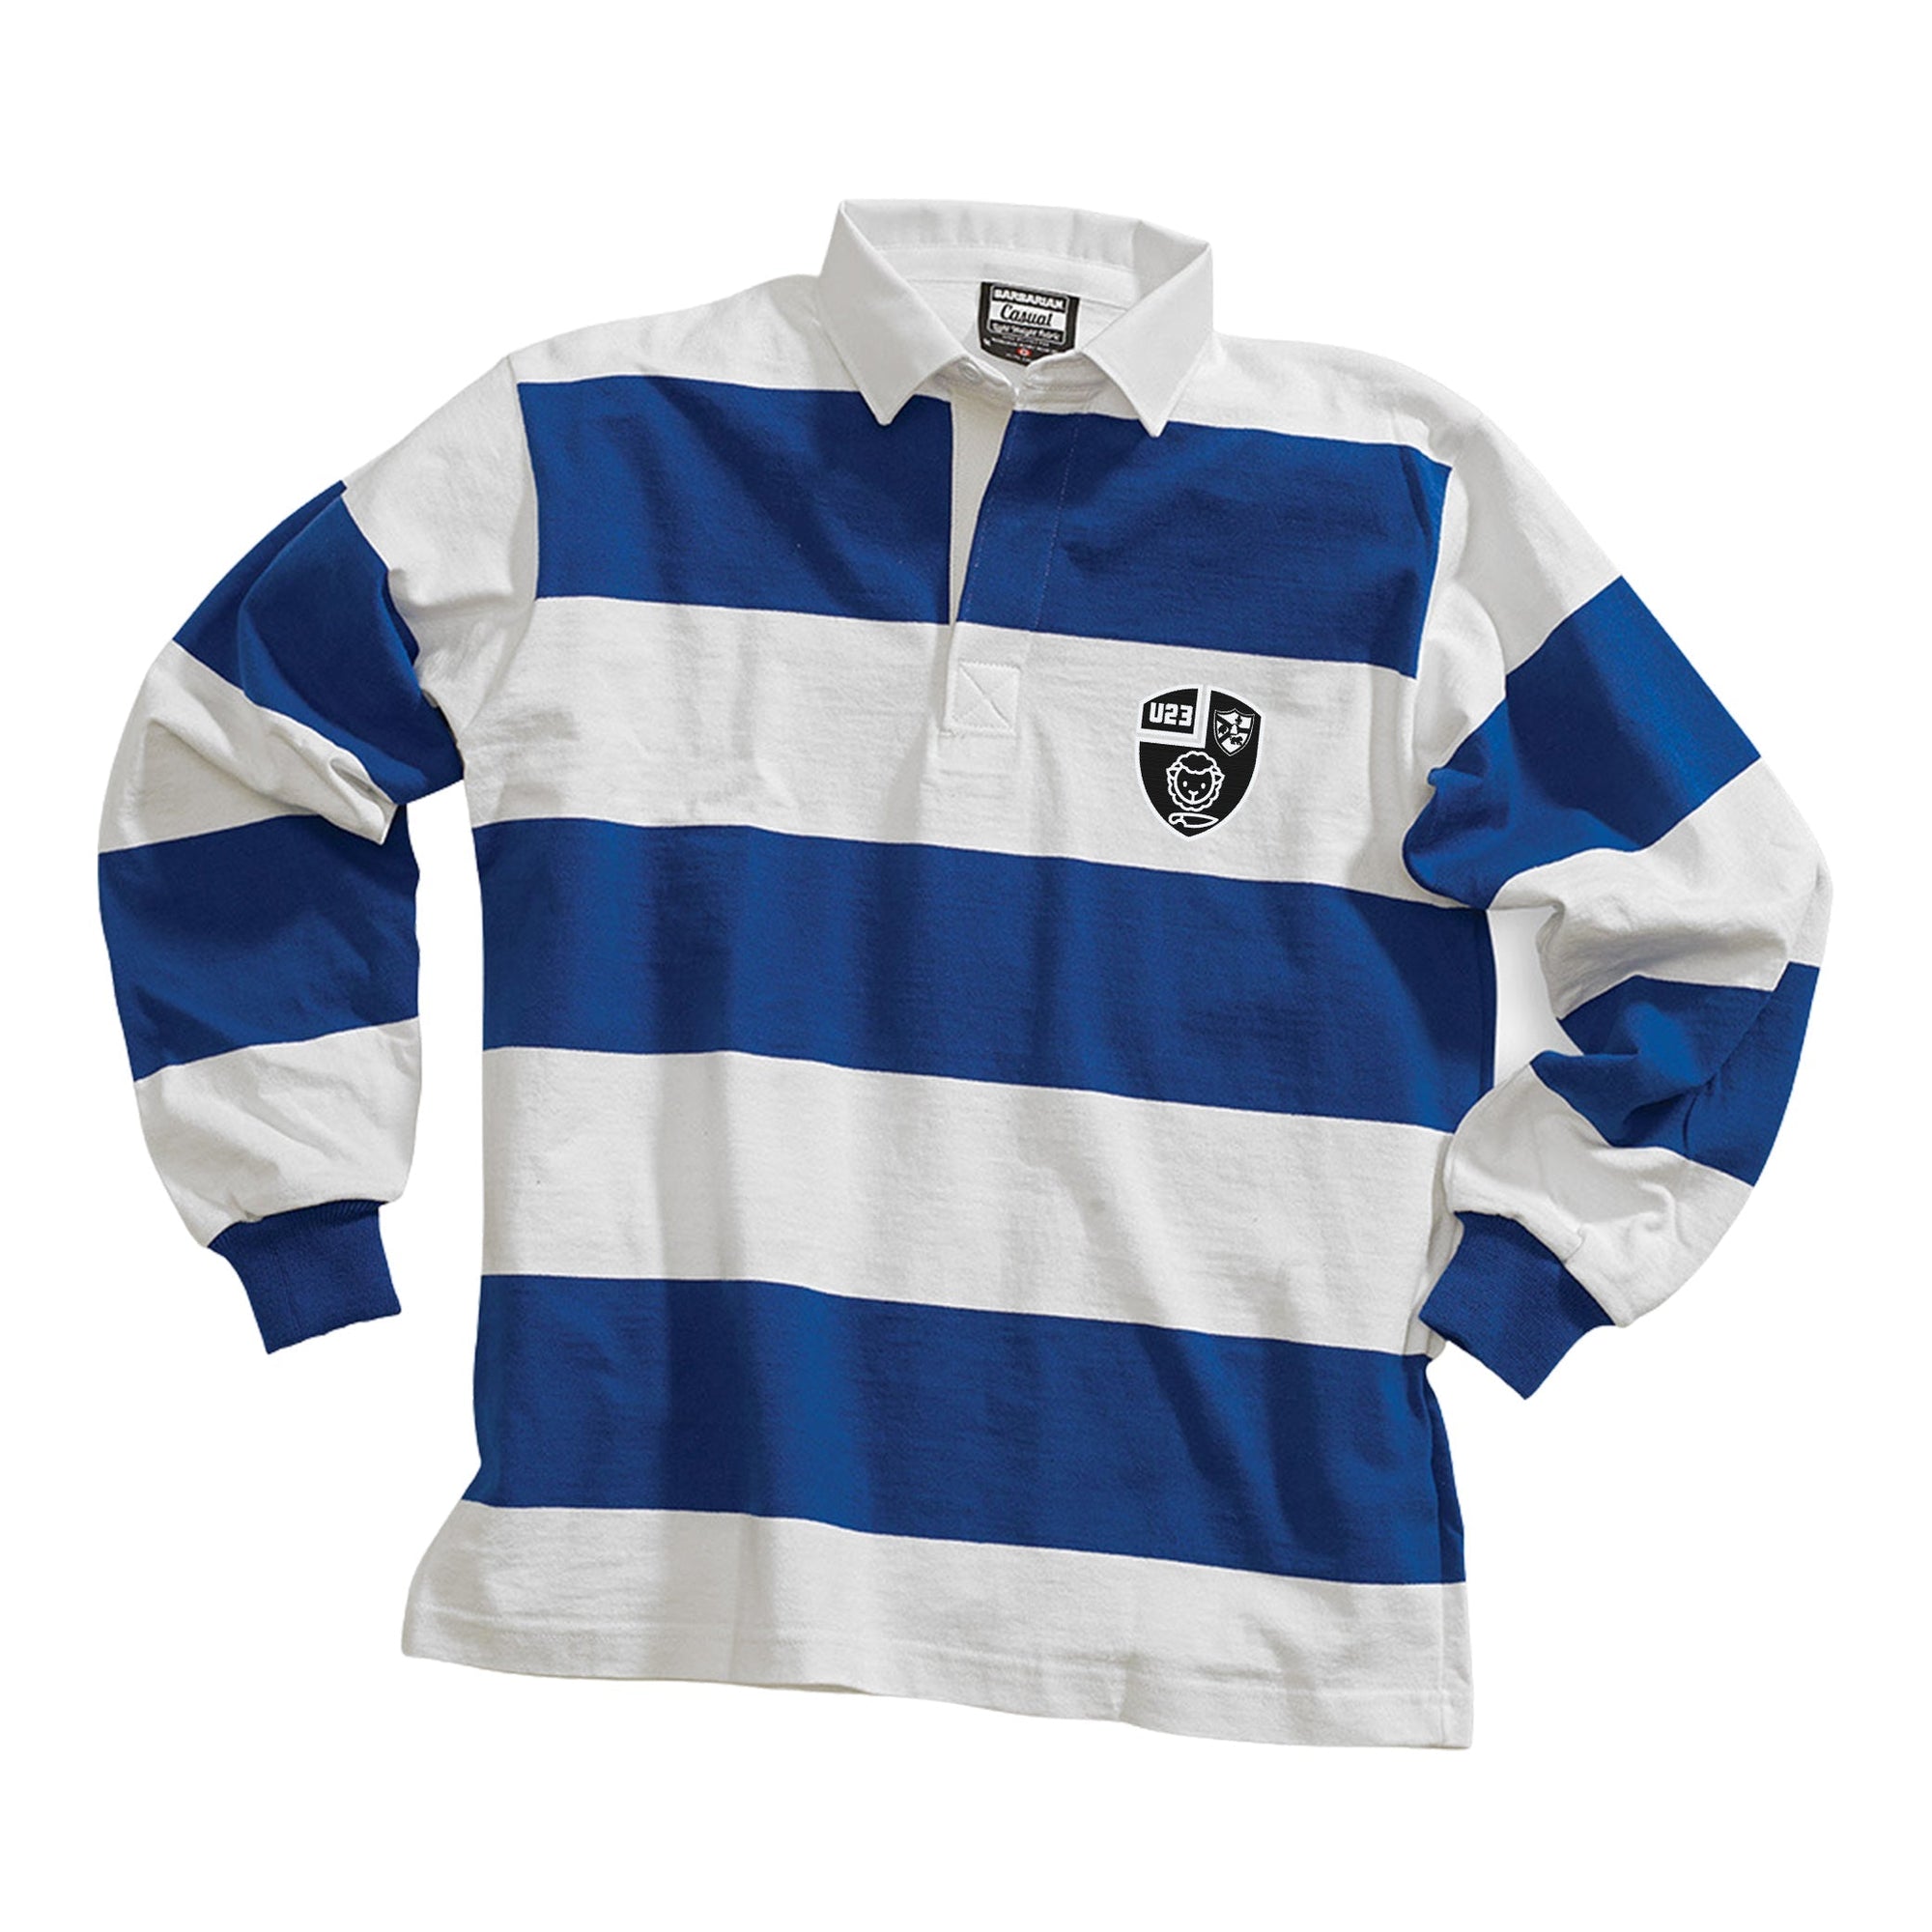 Rugby Imports Black & Blue U23 Casual Weight Stripe Jersey